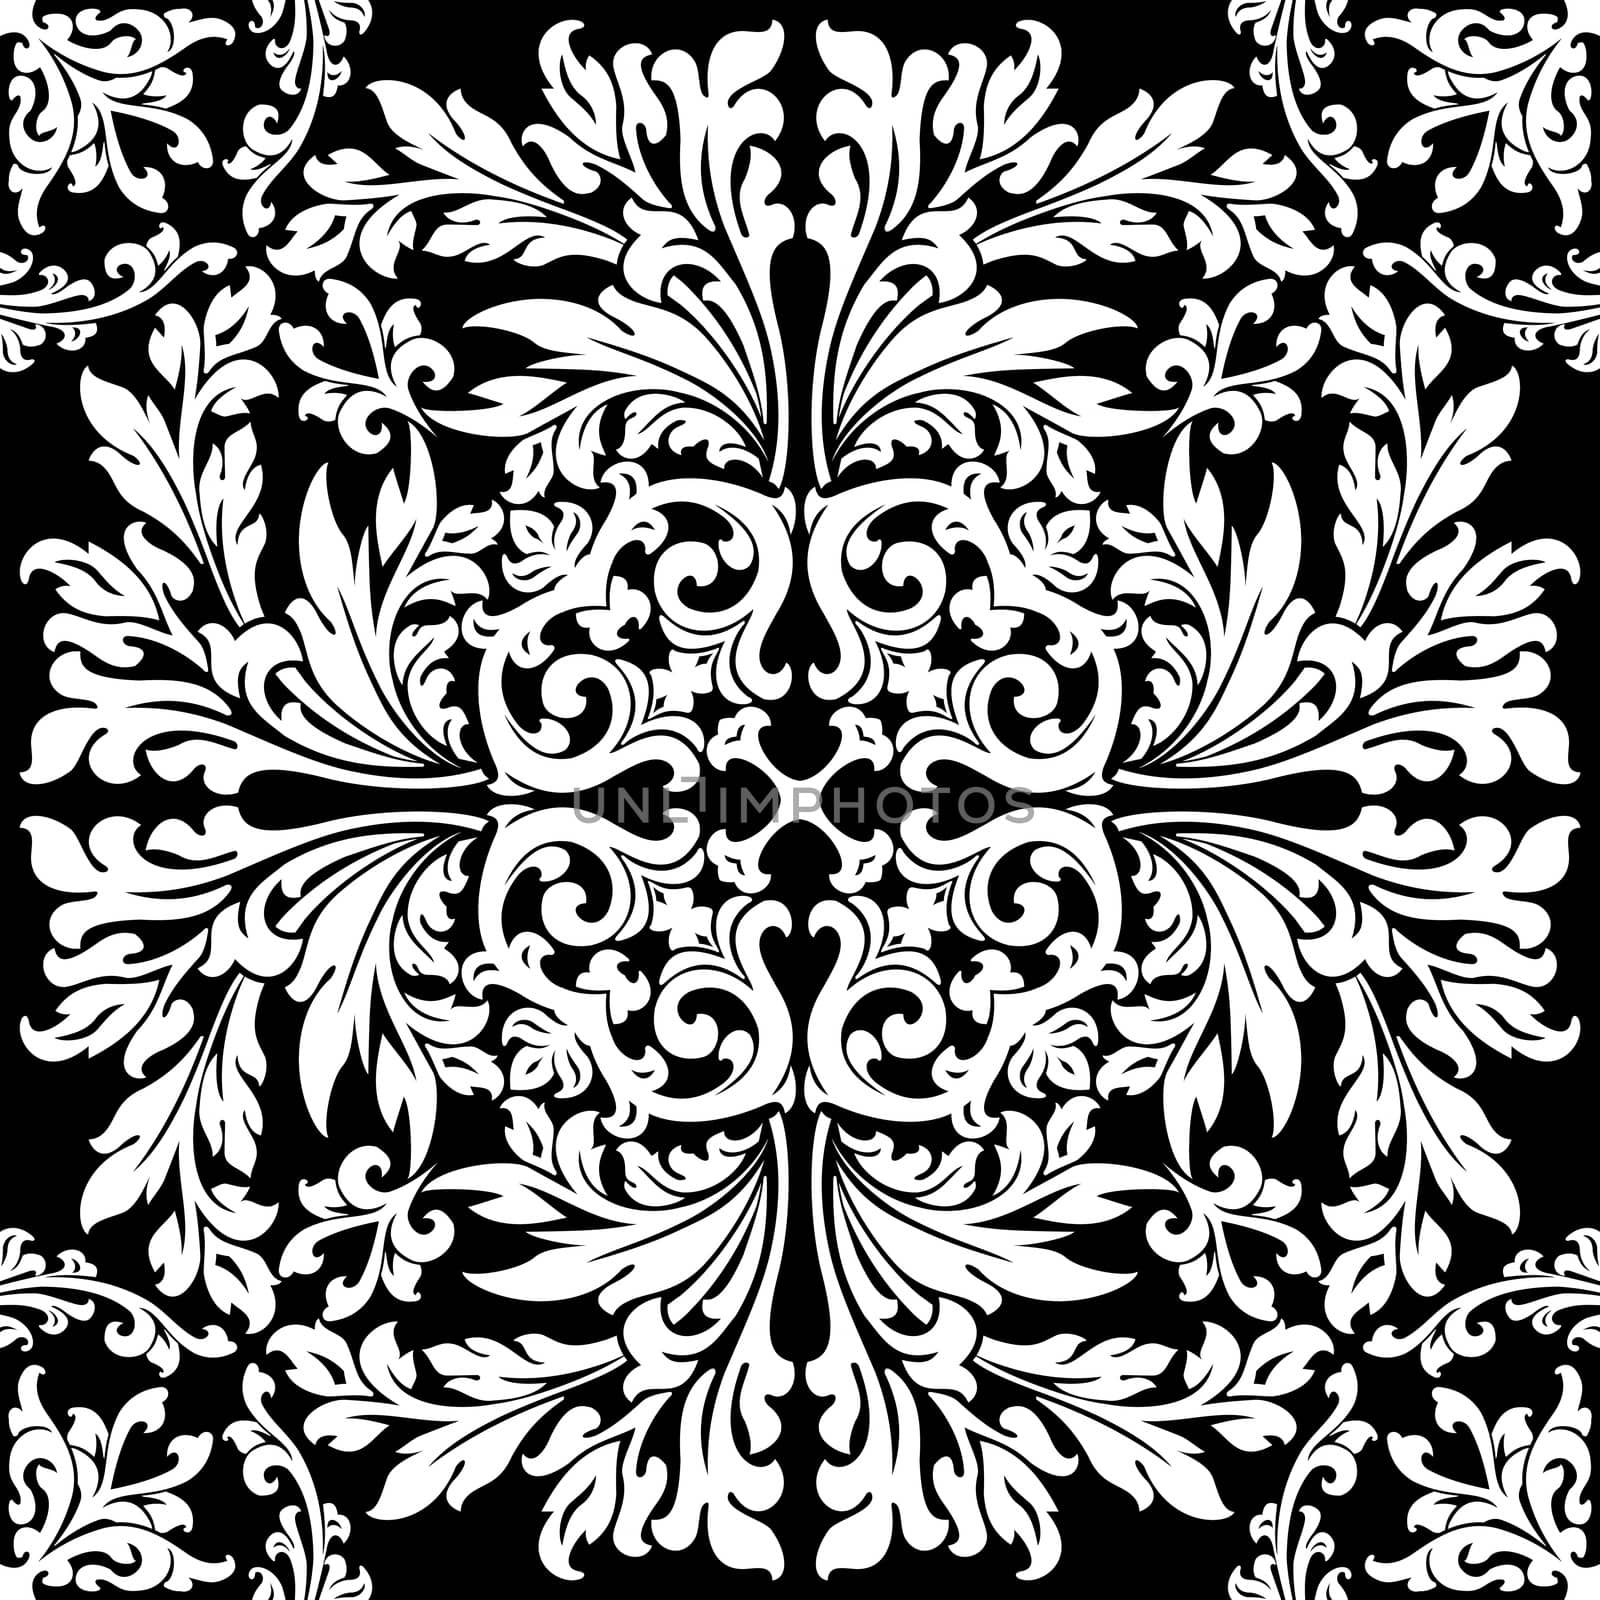 abstract floral decorative element in black color vector illustration